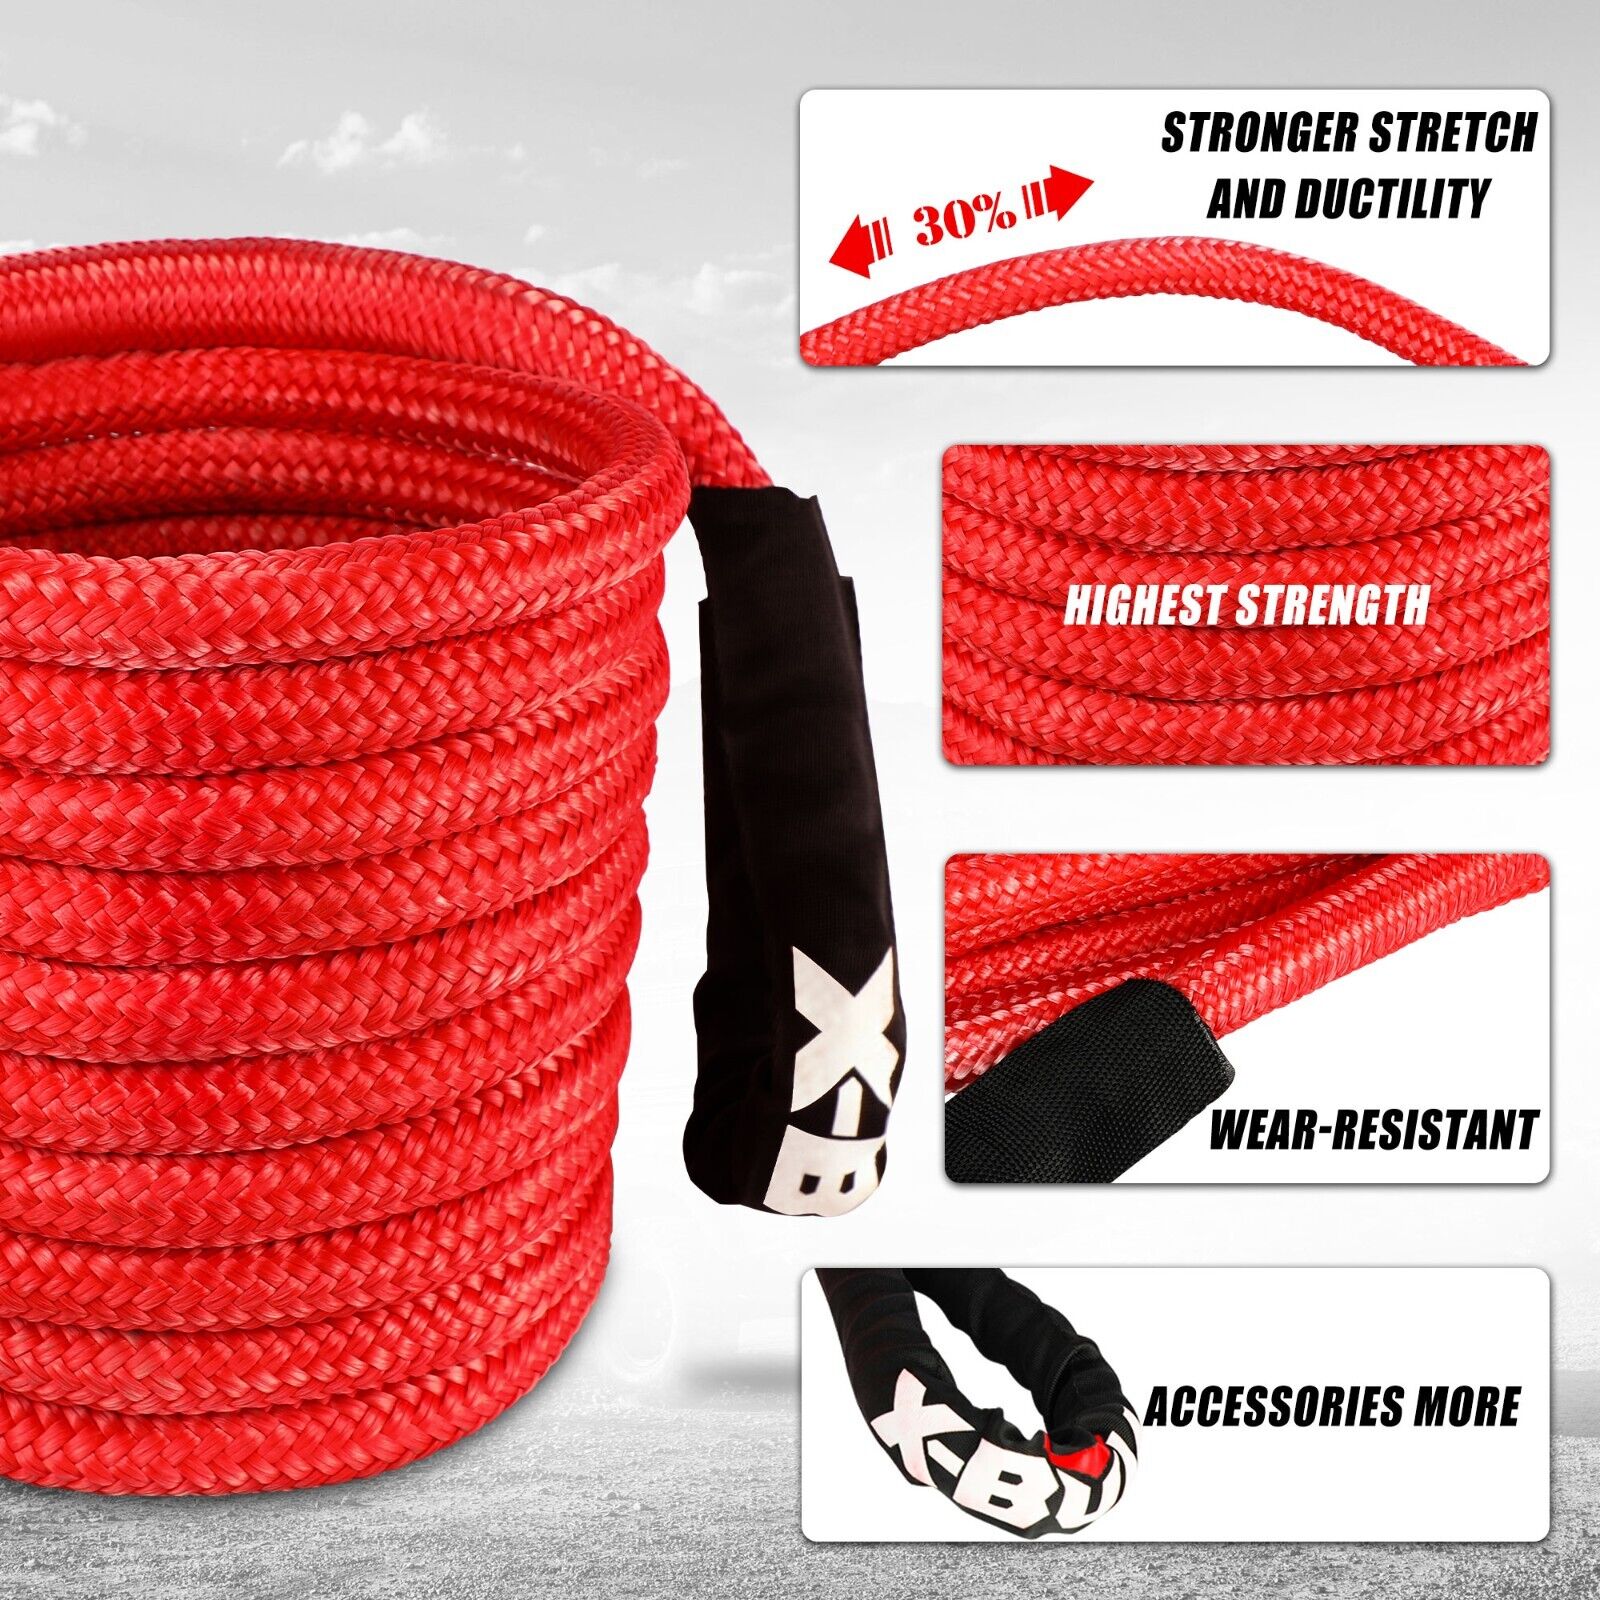 x-bull-kinetic-rope-22mm-x-9m-snatch-strap-recovery-kit-dyneema-tow-winch